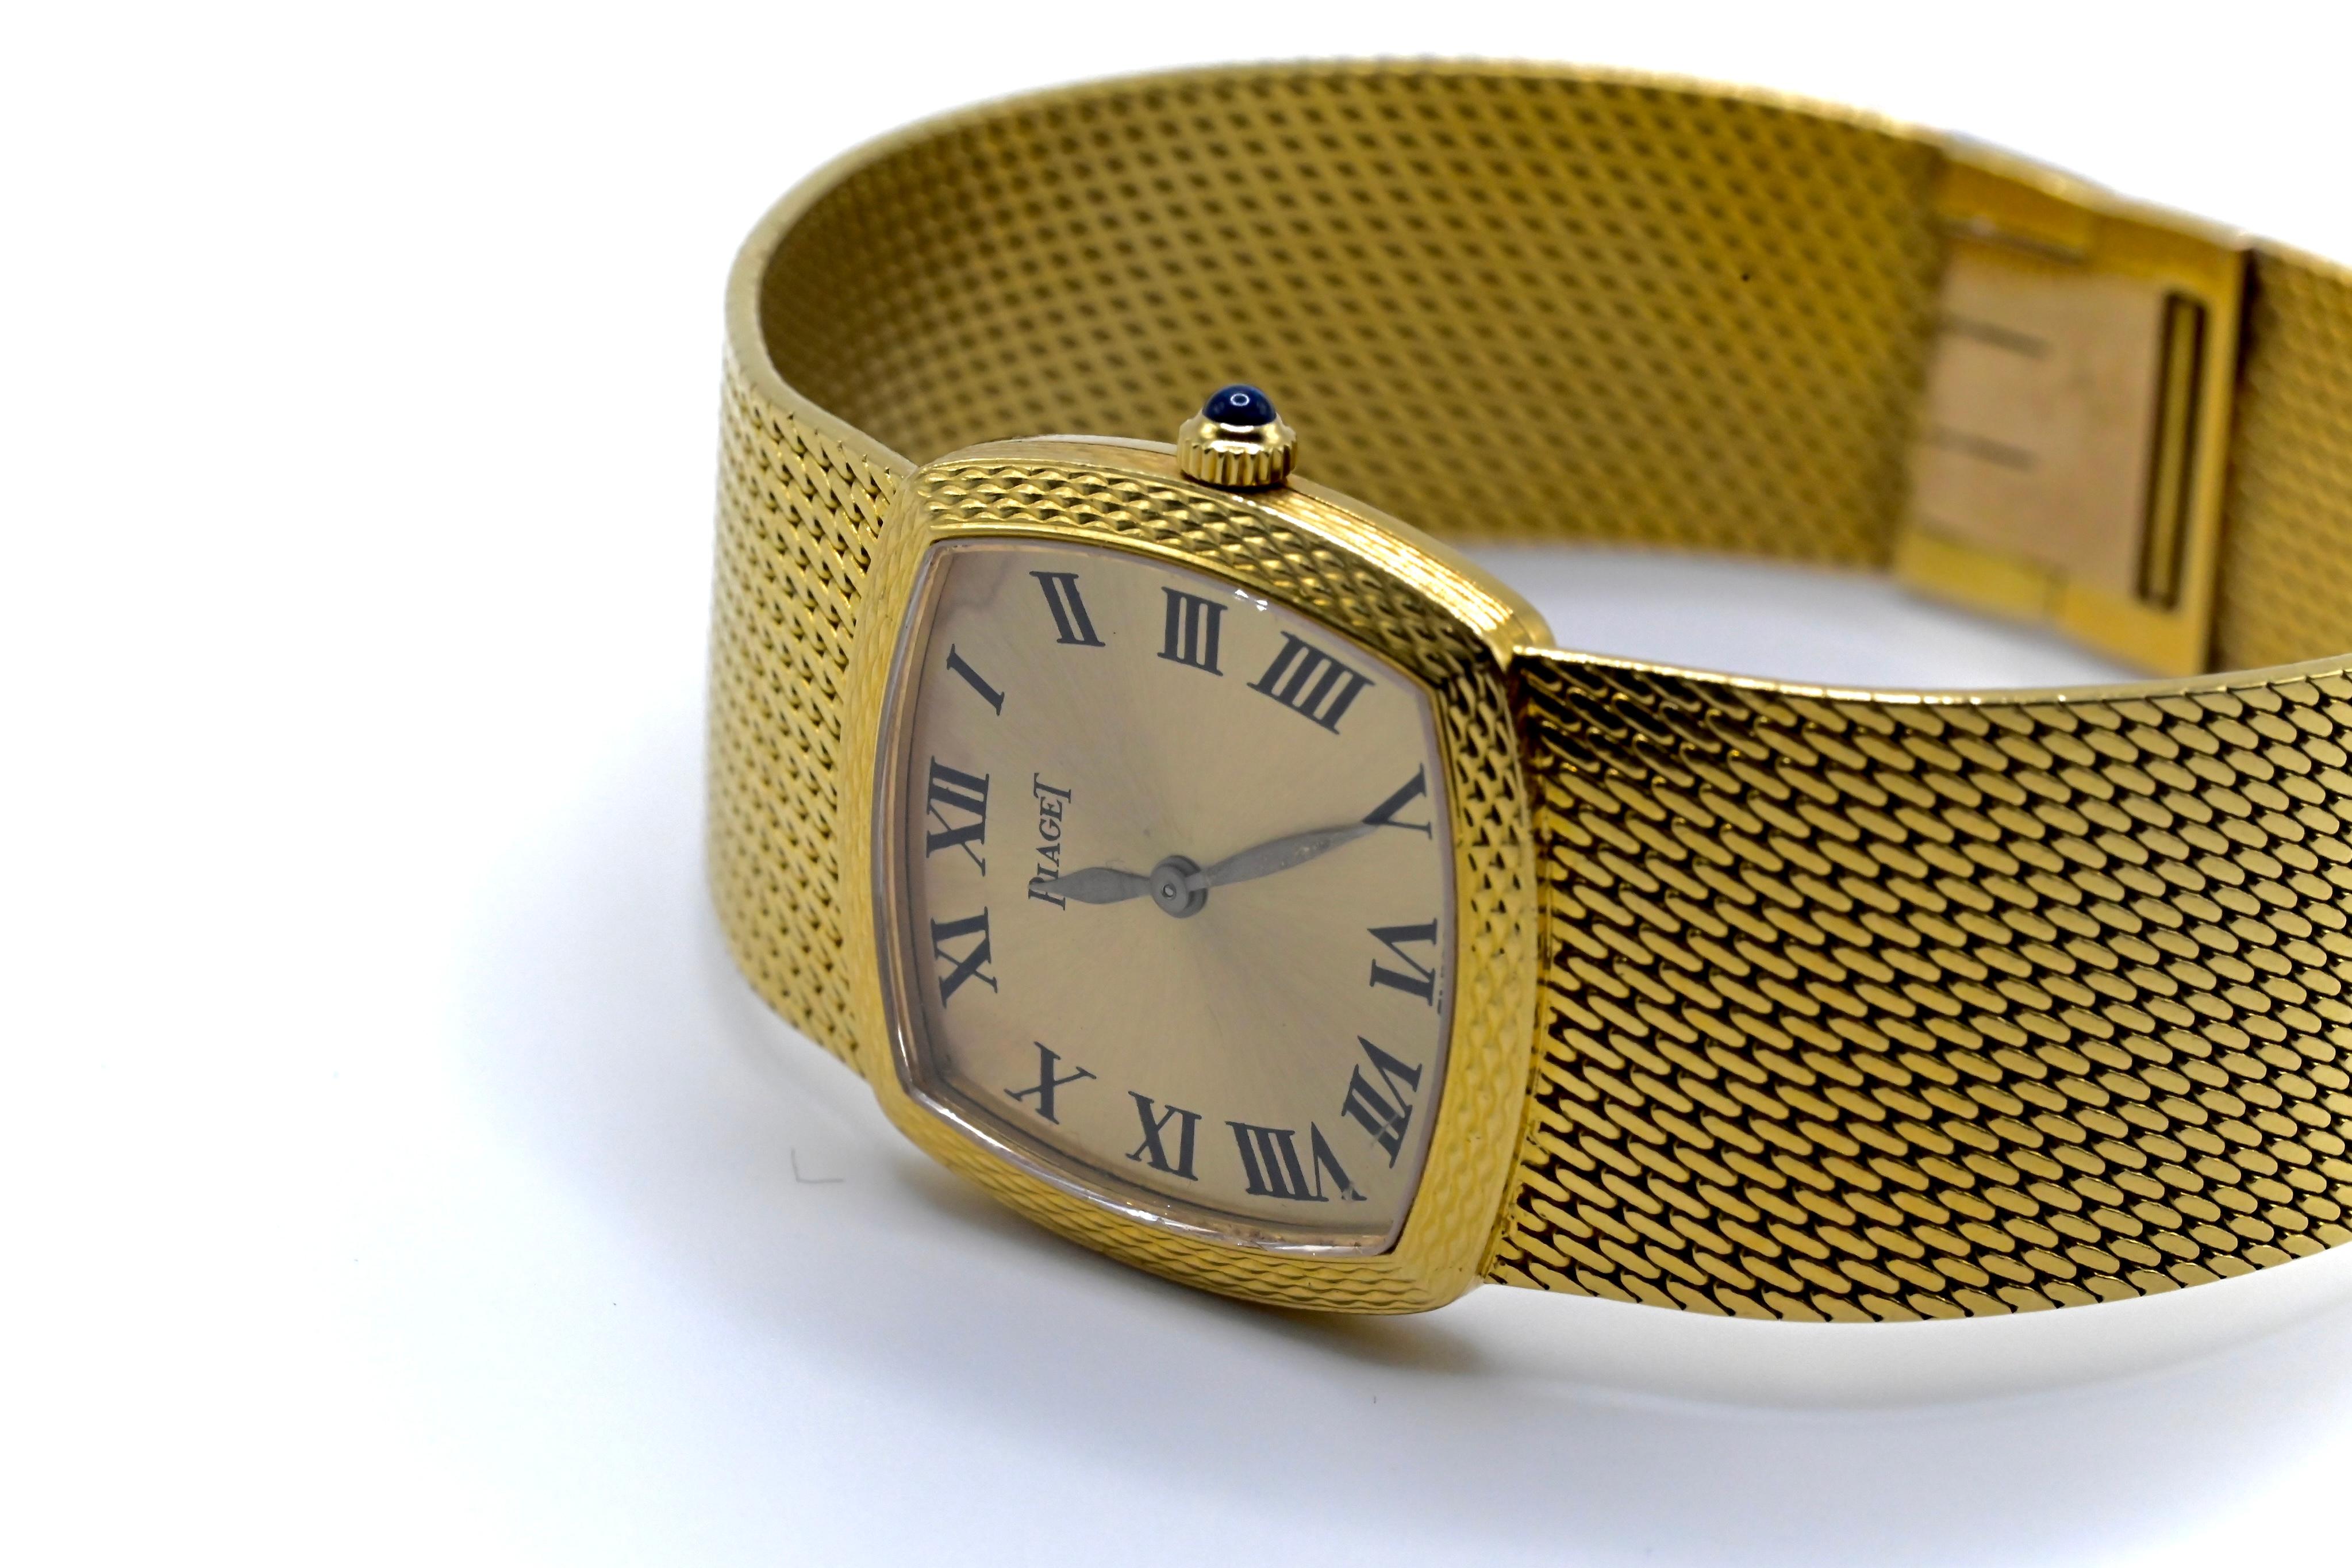 This is a beautiful, yet simplistic 18k yellow gold Piaget ladies wristwatch with a single blue sapphire on the crown of the watch. The strap length is 6 6/8 inches, its case diameter is 23mm, and overall it weighs 52 grams. Comes with 2 extra links